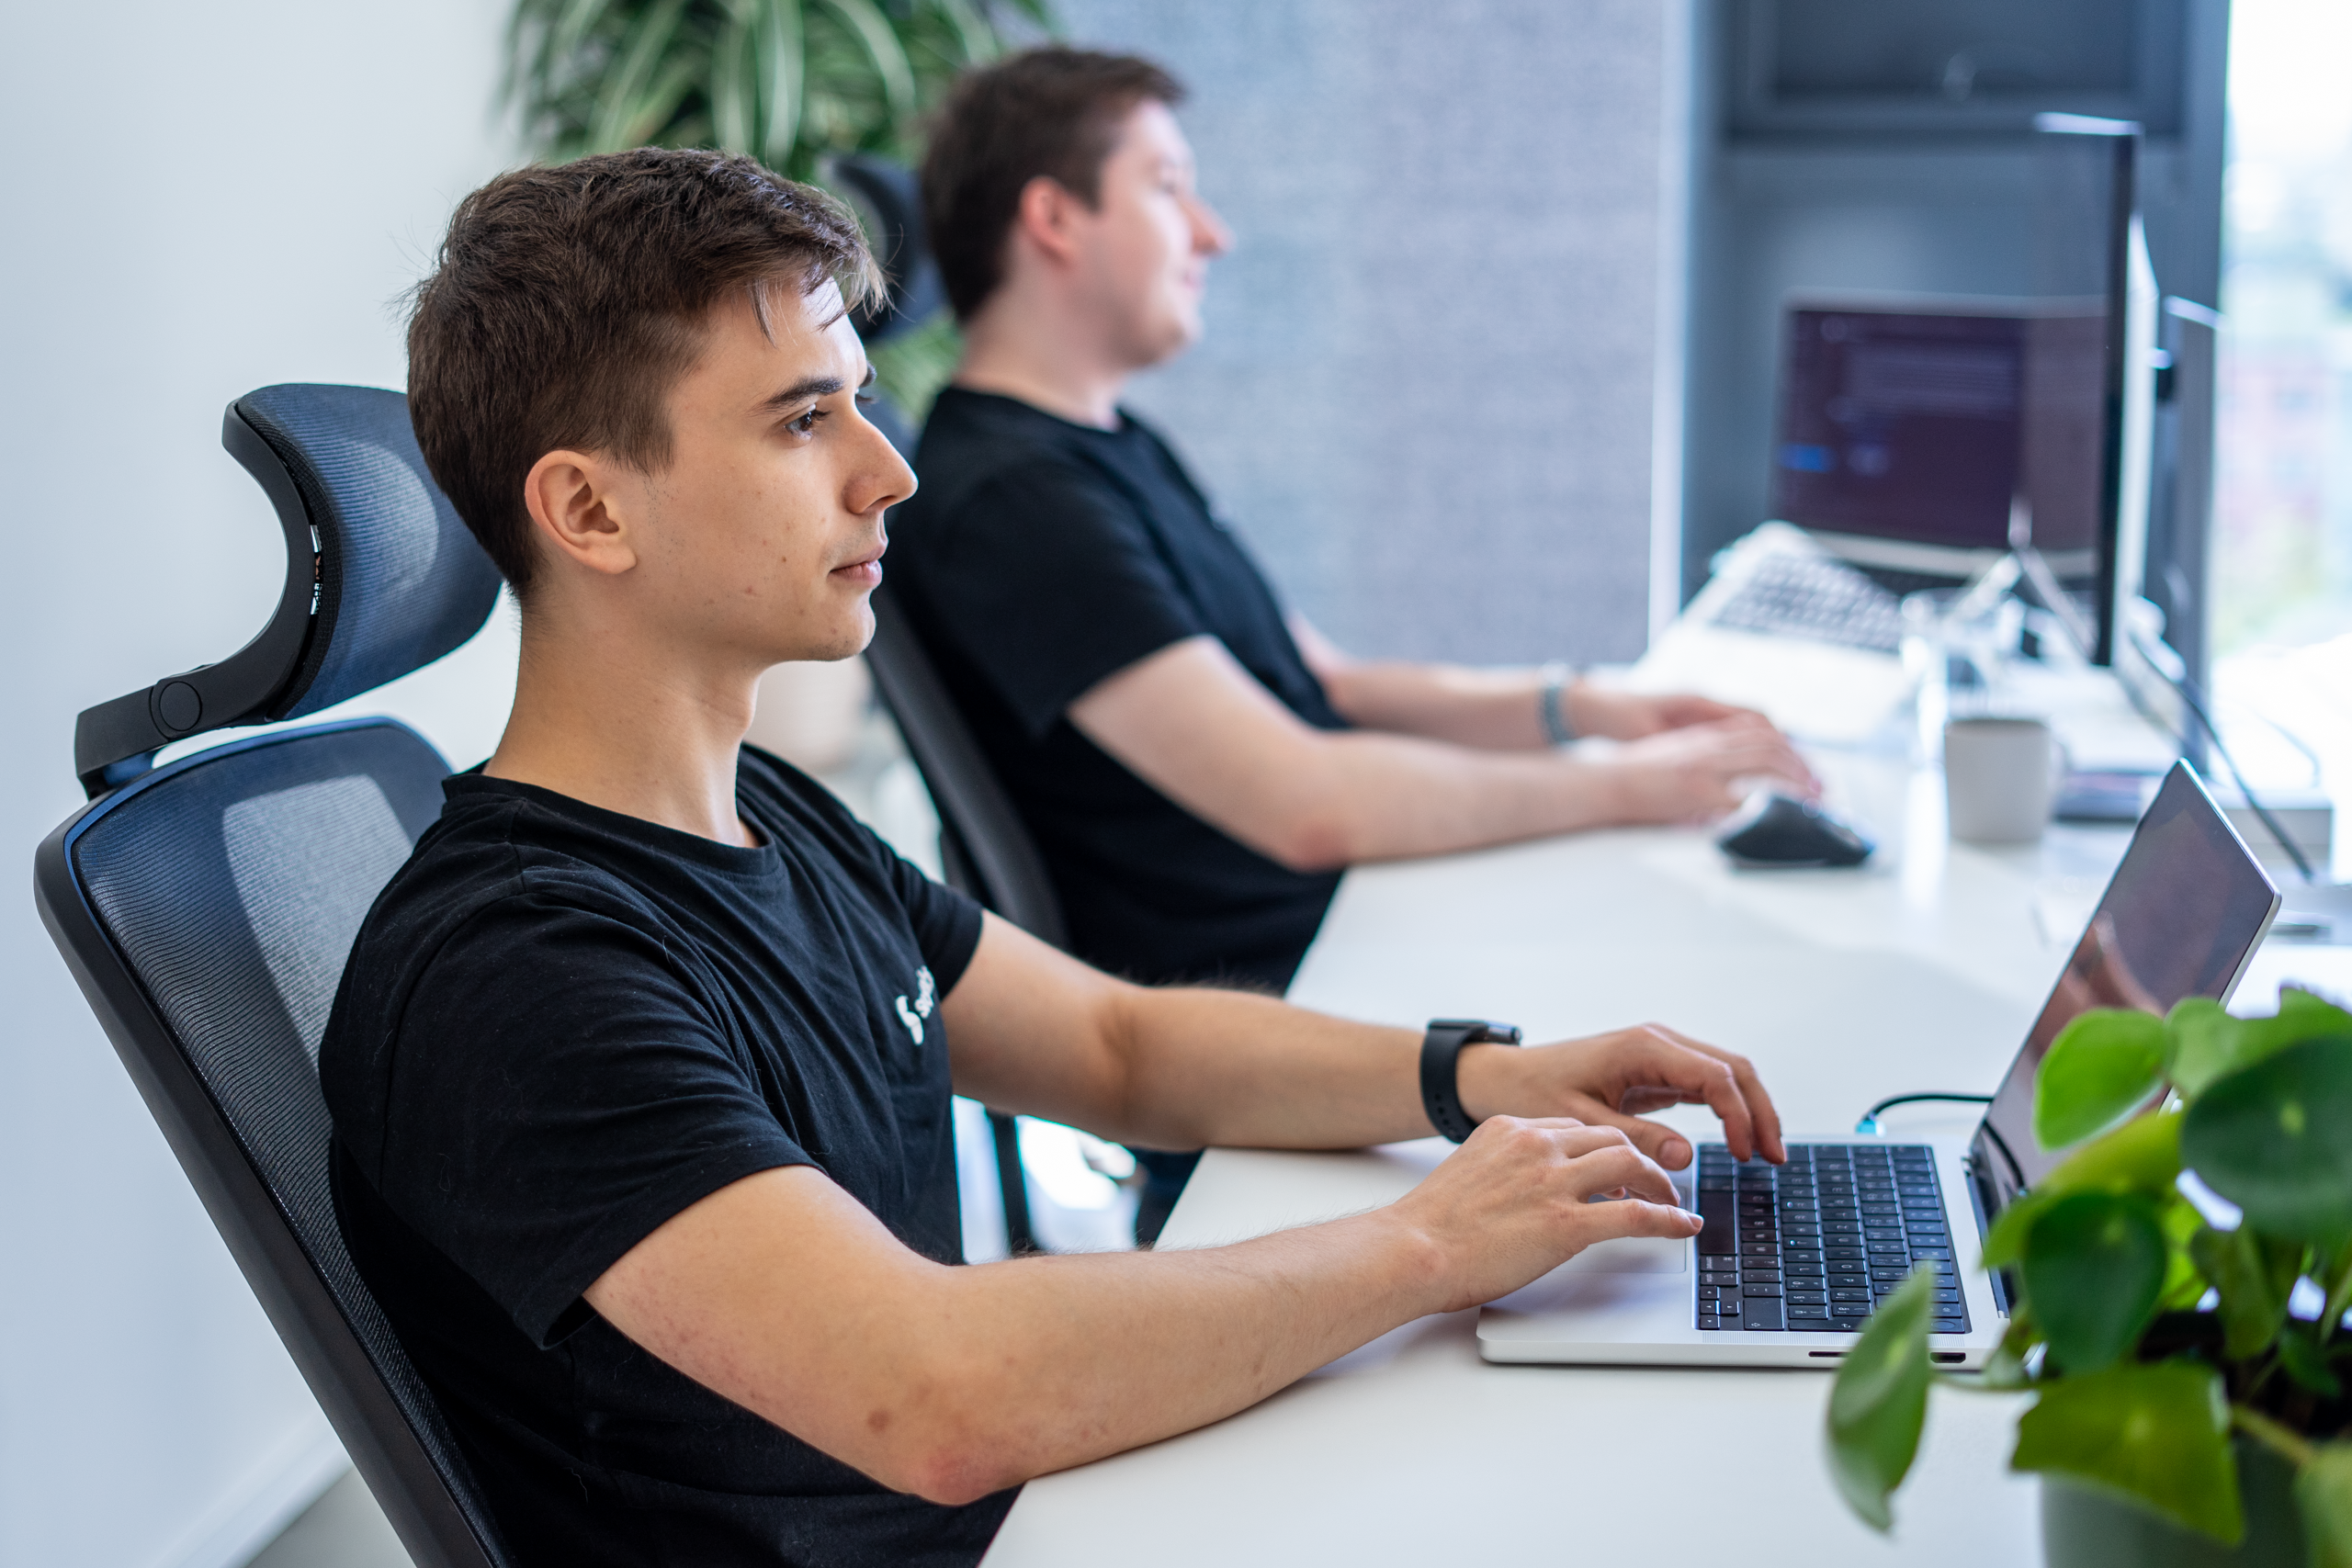 Erik Kandalík and Tomas Kuchárik, data scientists, collaborating at work. This image captures their teamwork and expertise in the field of AI and data science.